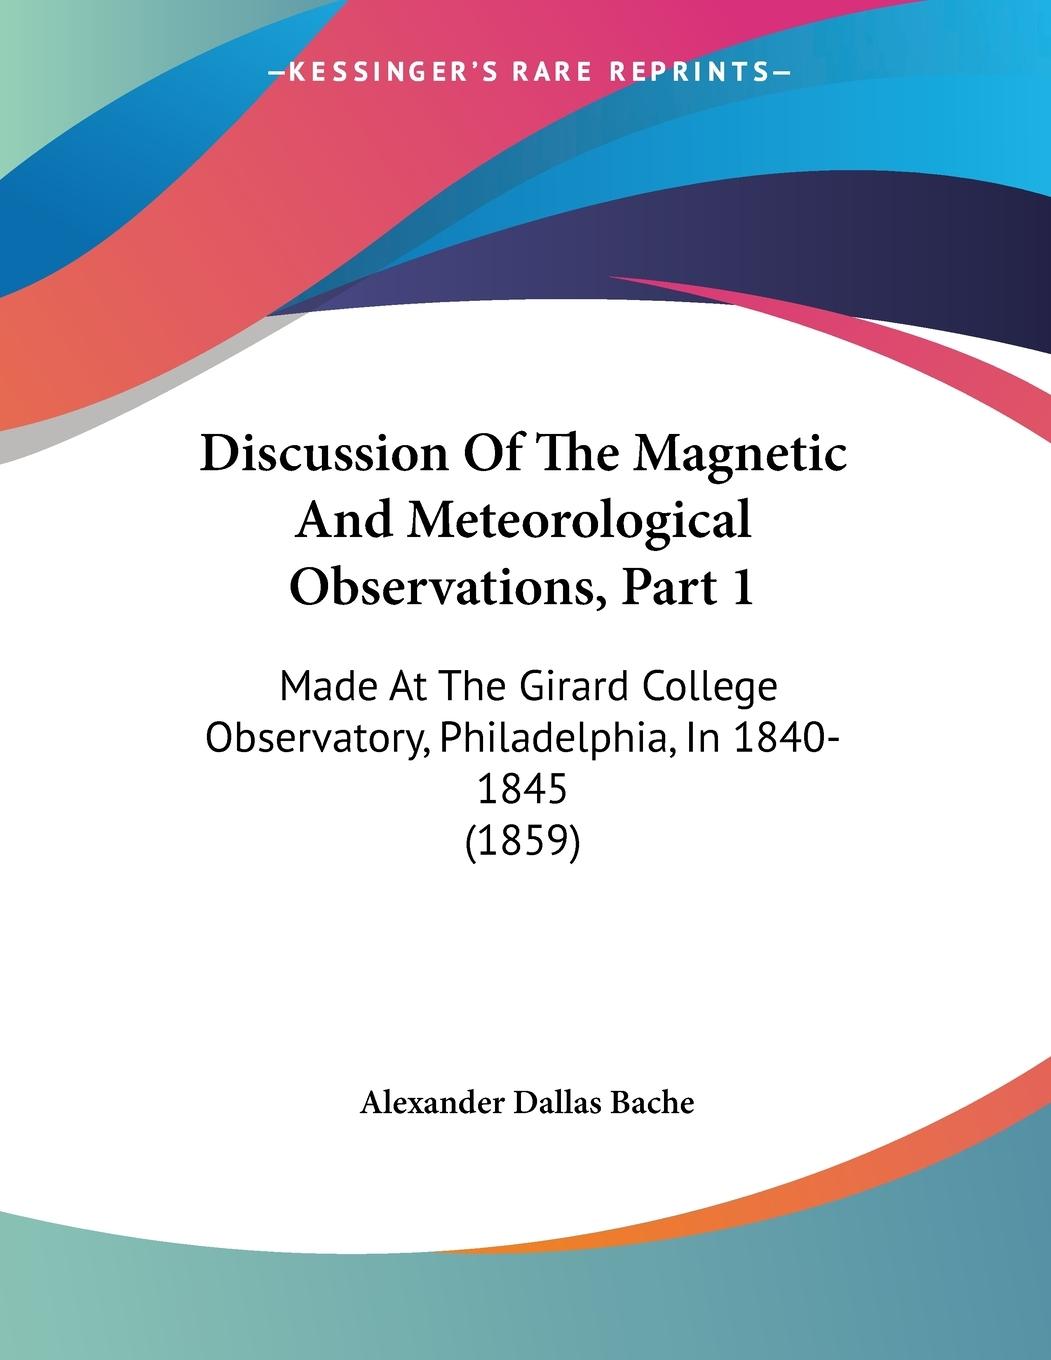 Discussion Of The Magnetic And Meteorological Observations, Part 1 - Bache, Alexander Dallas